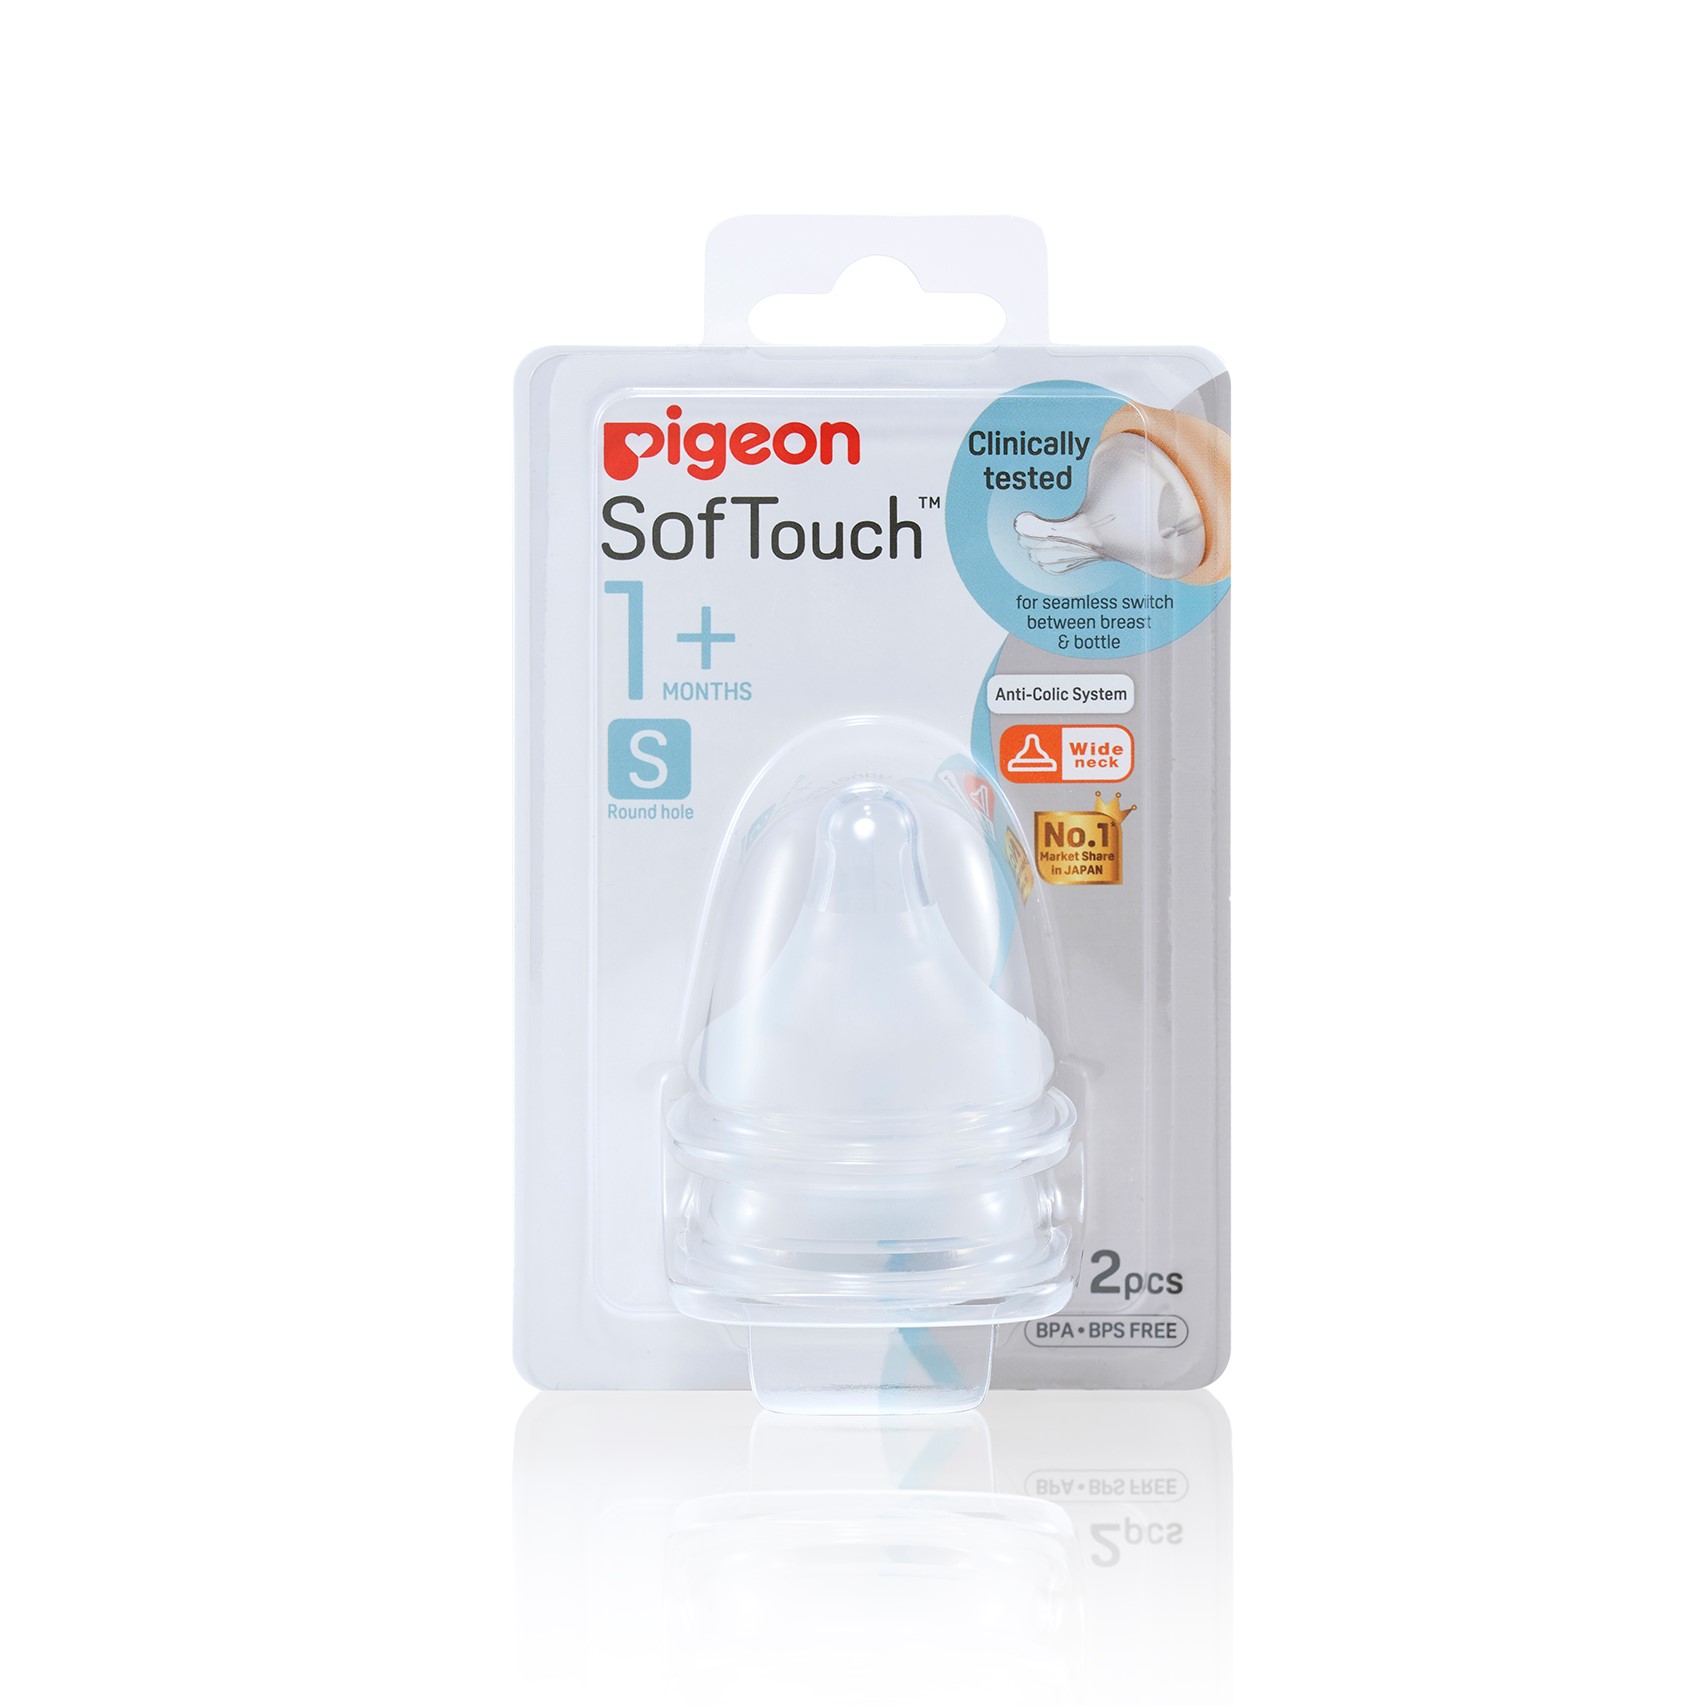 baby-fair Pigeon SofTouch Nipple Blister Pack 2Pcs (S) (PG-78479)